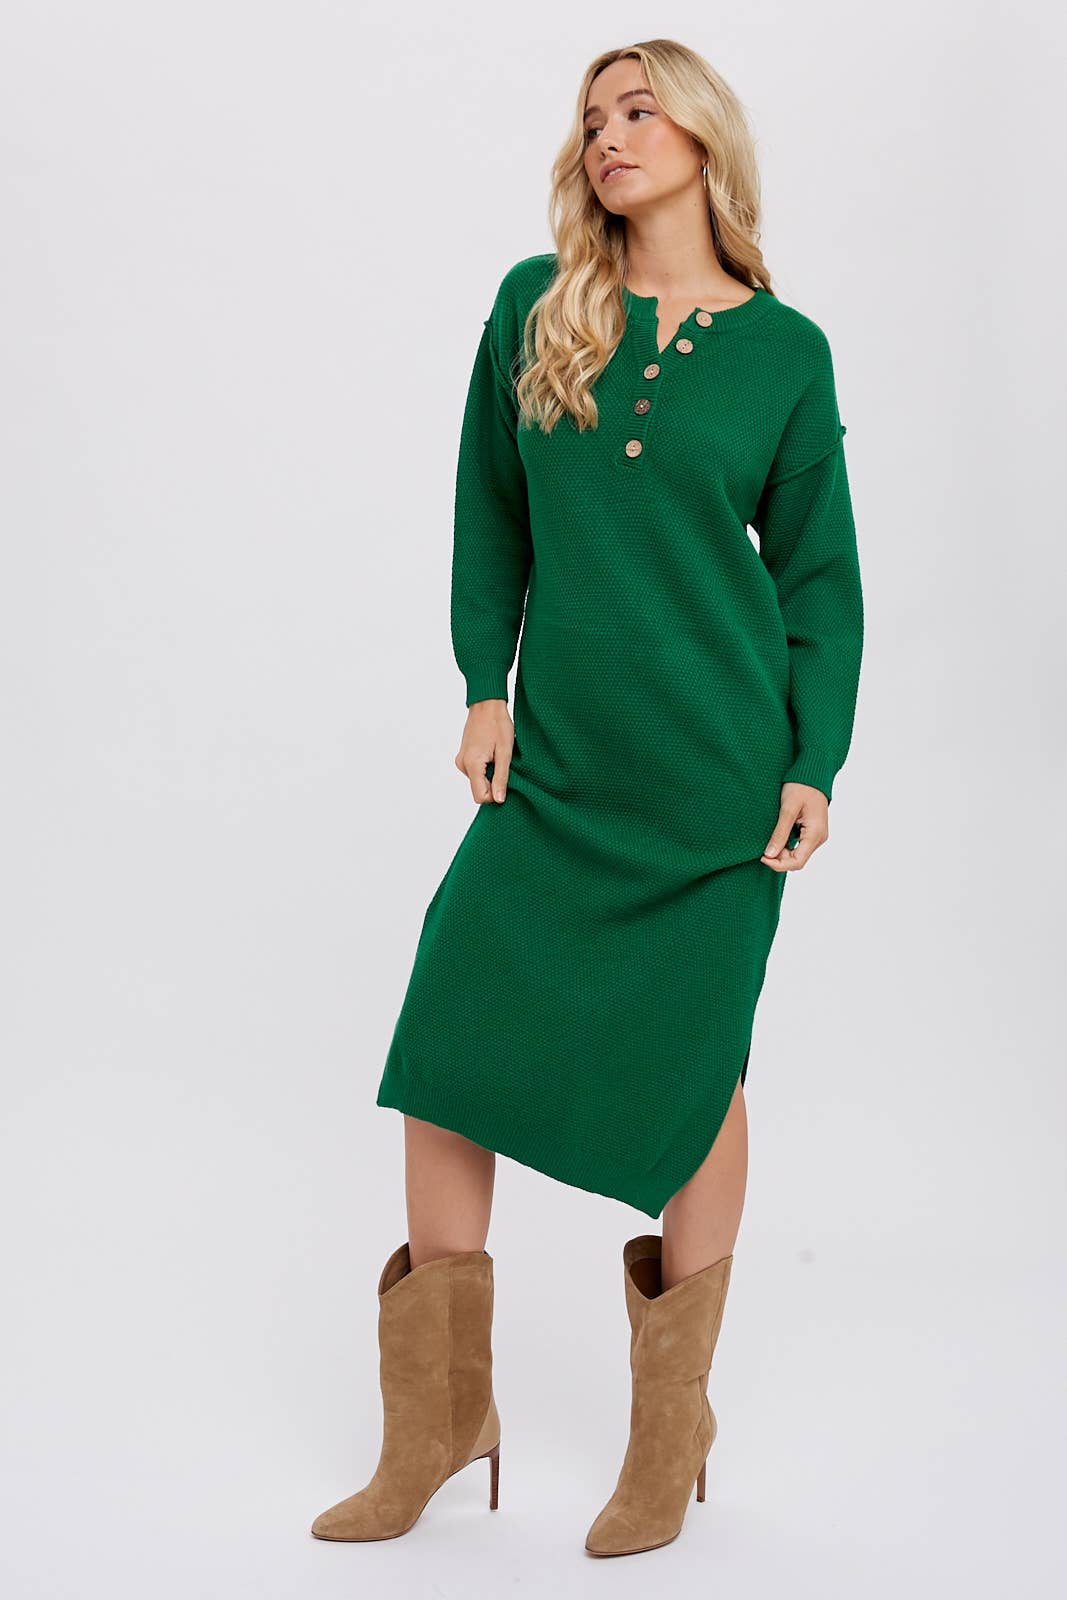 Jane Midi Sweater Dress - Milly's Boutique